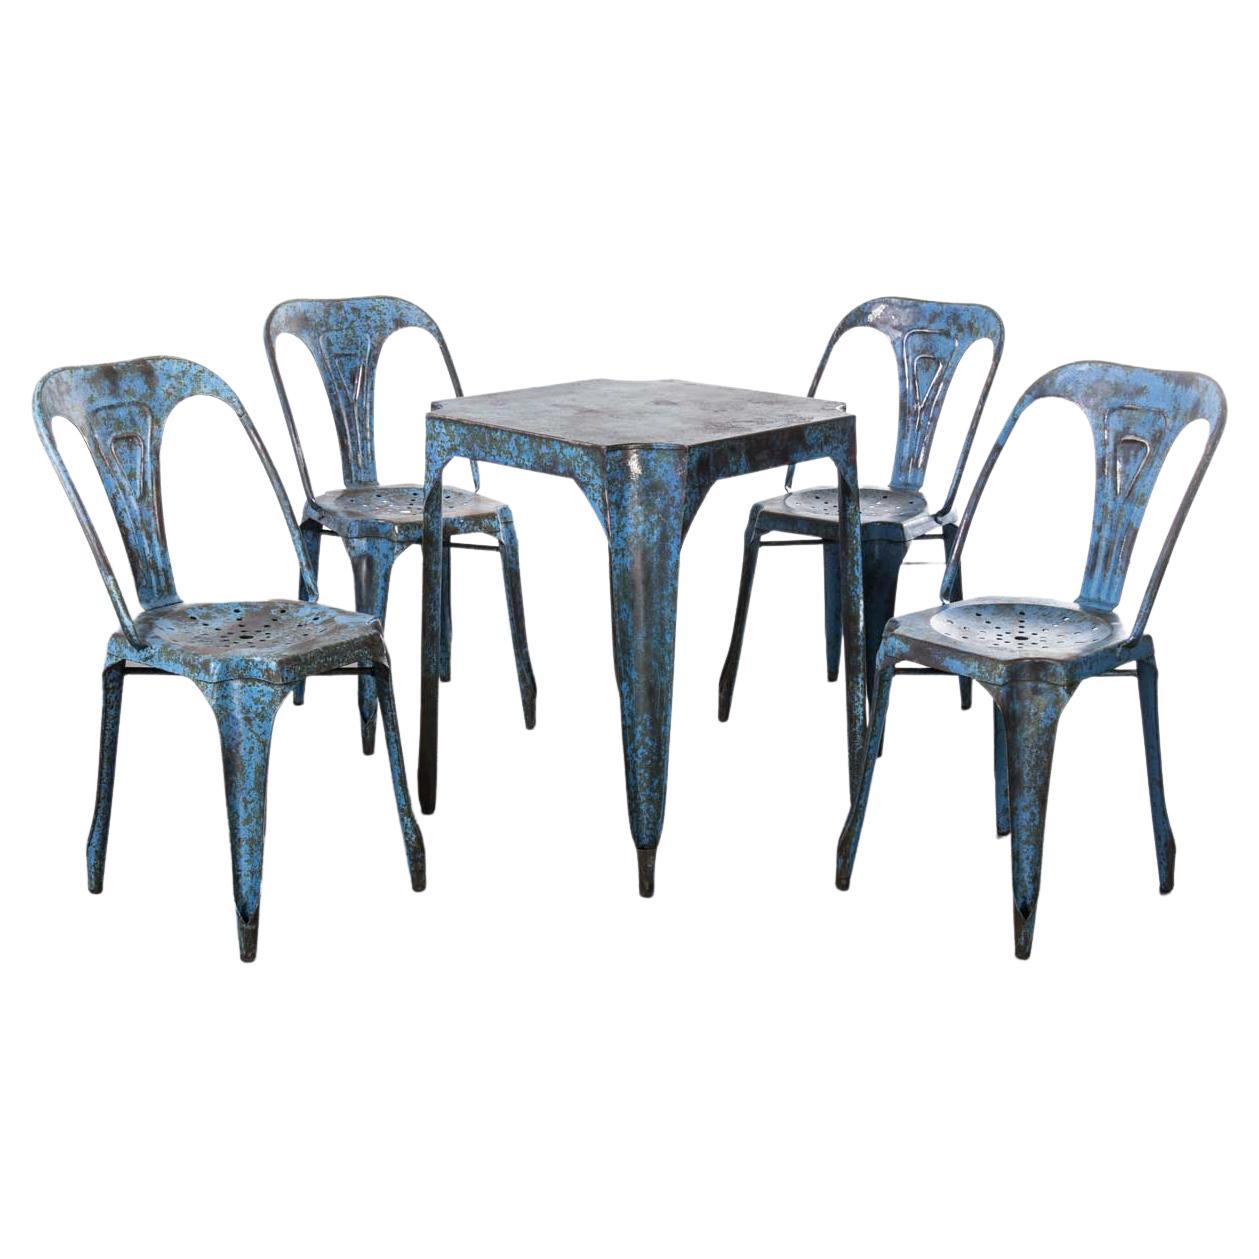 1950's Original French Multipl's Table And Chair Set - Blue For Sale